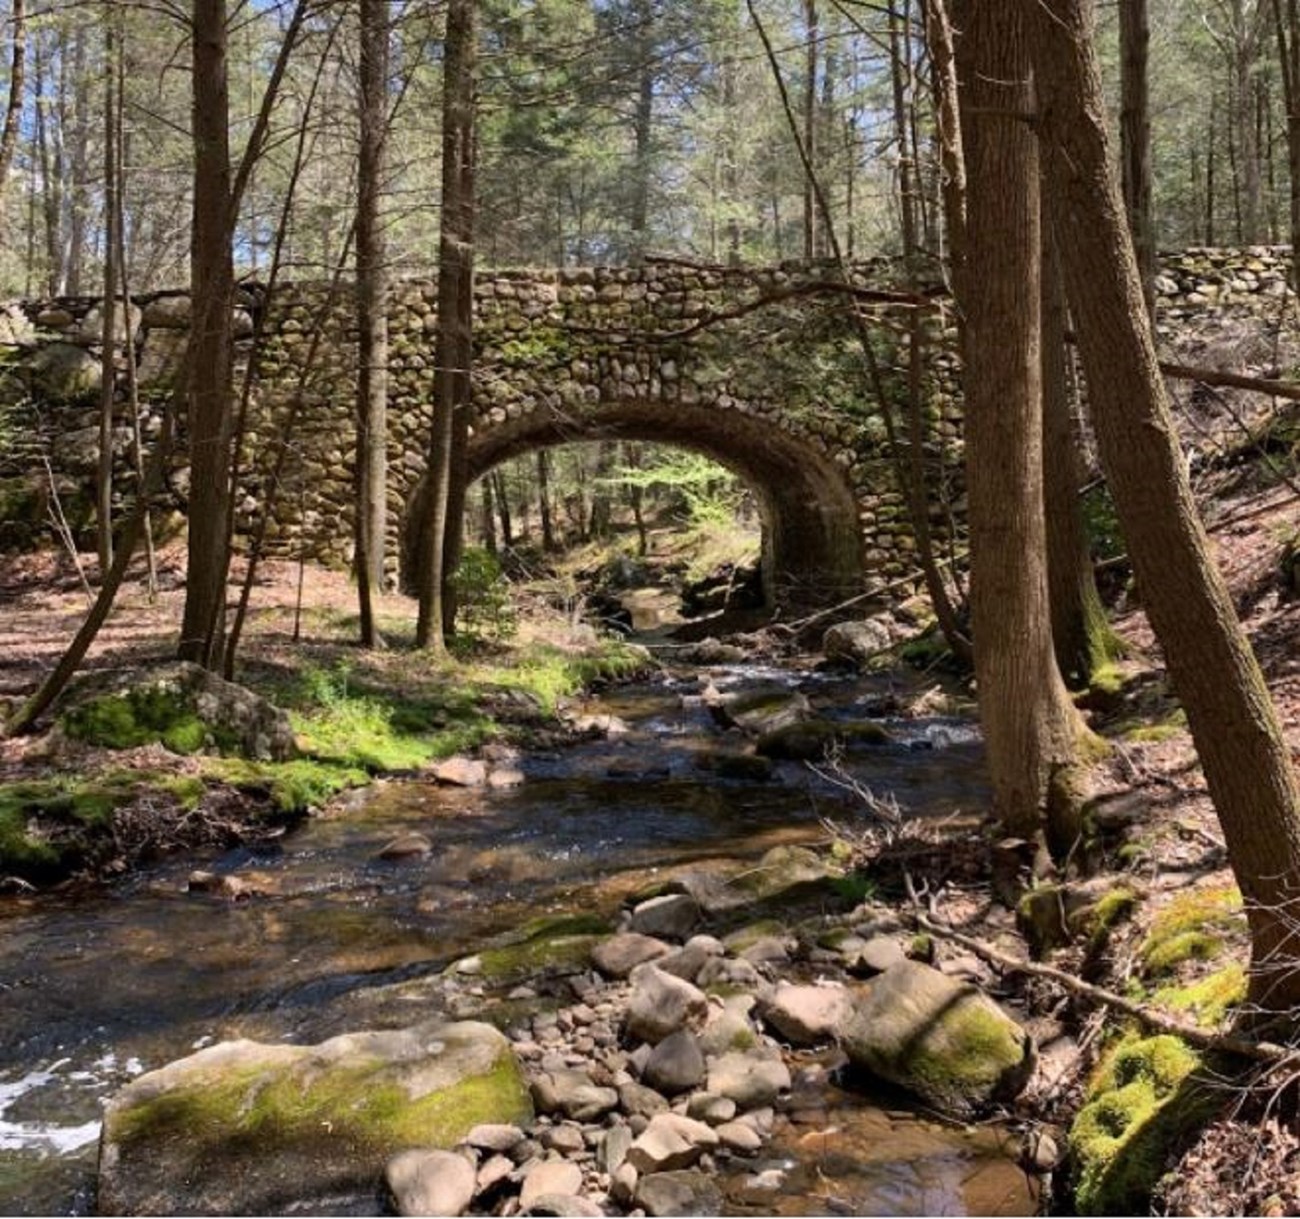 “People who have heard of Devil’s Hopyard State Park, may not have heard of the many preserves that our towns also have to offer. Do they know that over 50% of Lyme has been designated open space? Do they know about our lakes and camping opportunities? Th